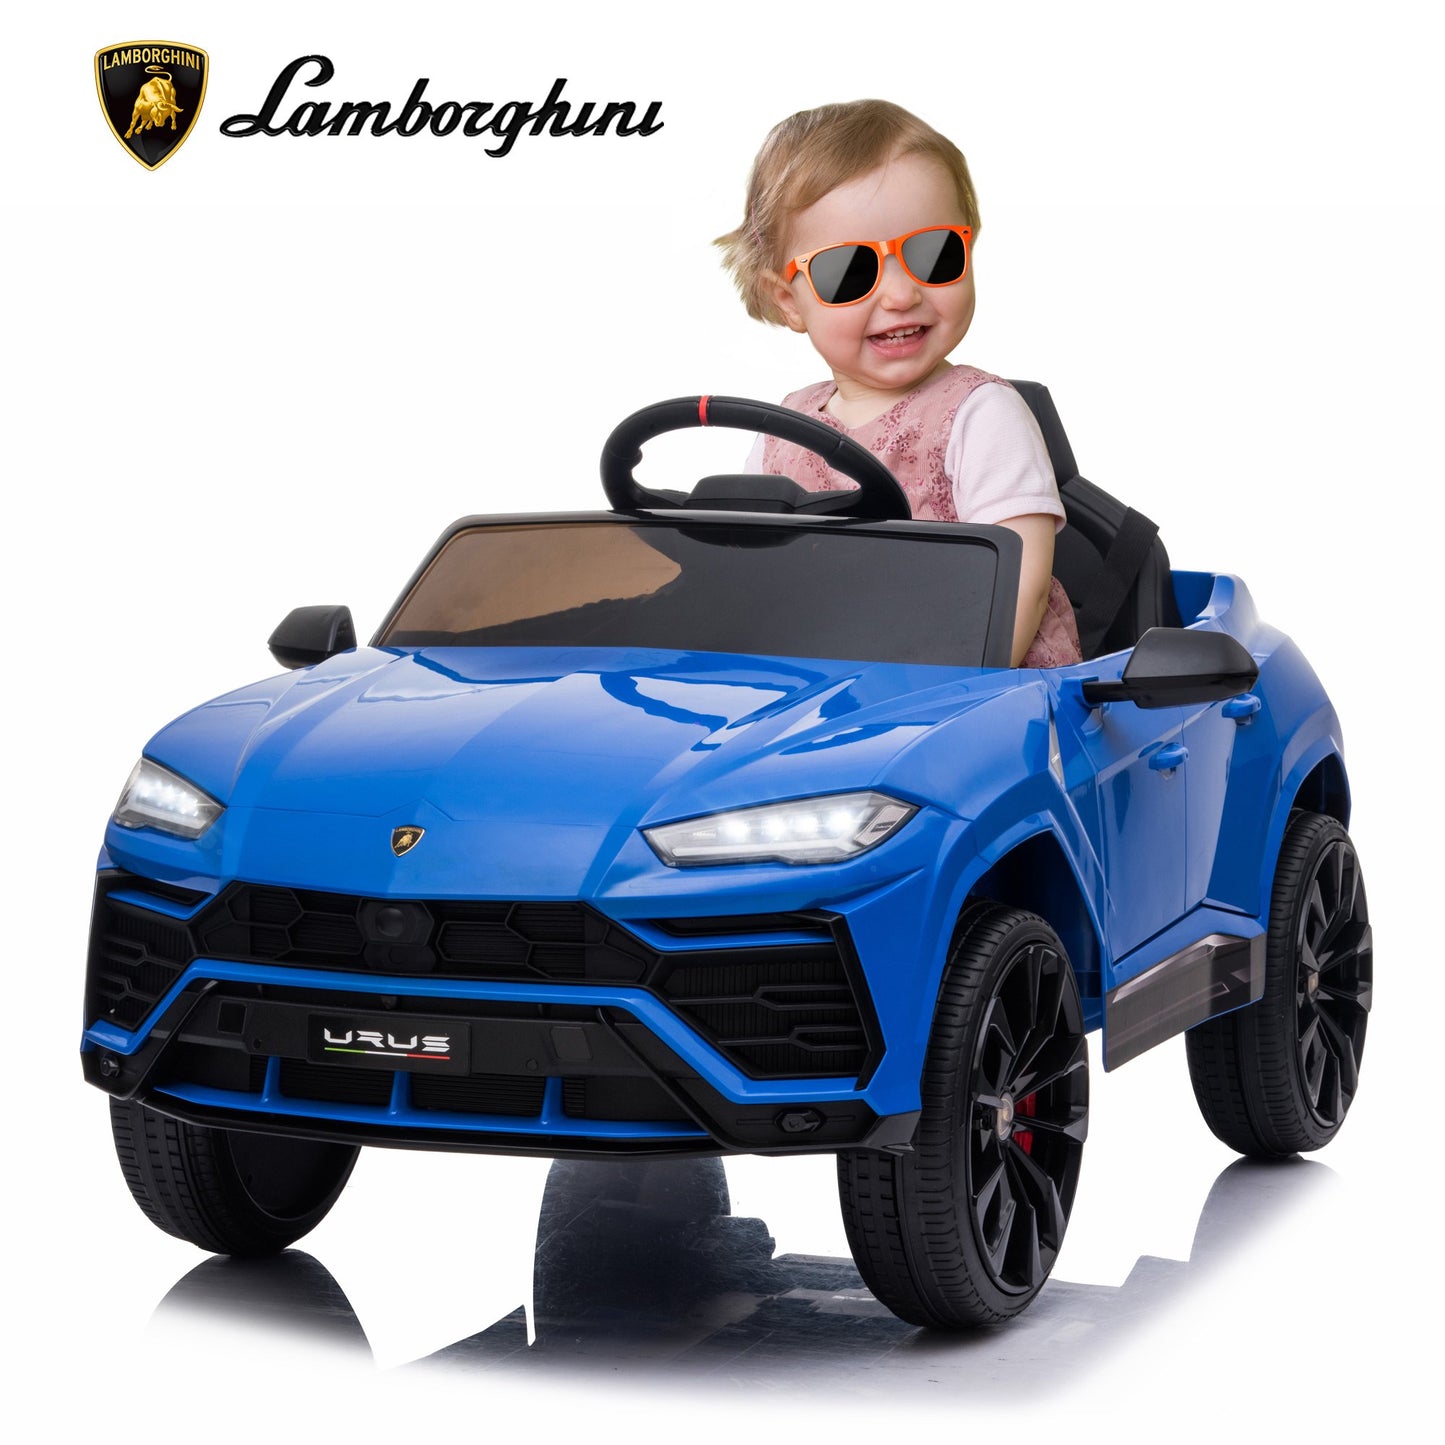 SYNGAR Licensed Lamborghini 12 V Powered Ride on Cars with Remote Control, 3 Speeds, LED Lights, MP3 Player, Horn, Kids Electric Vehicles Ride on Toy for Boys Girls, Blue